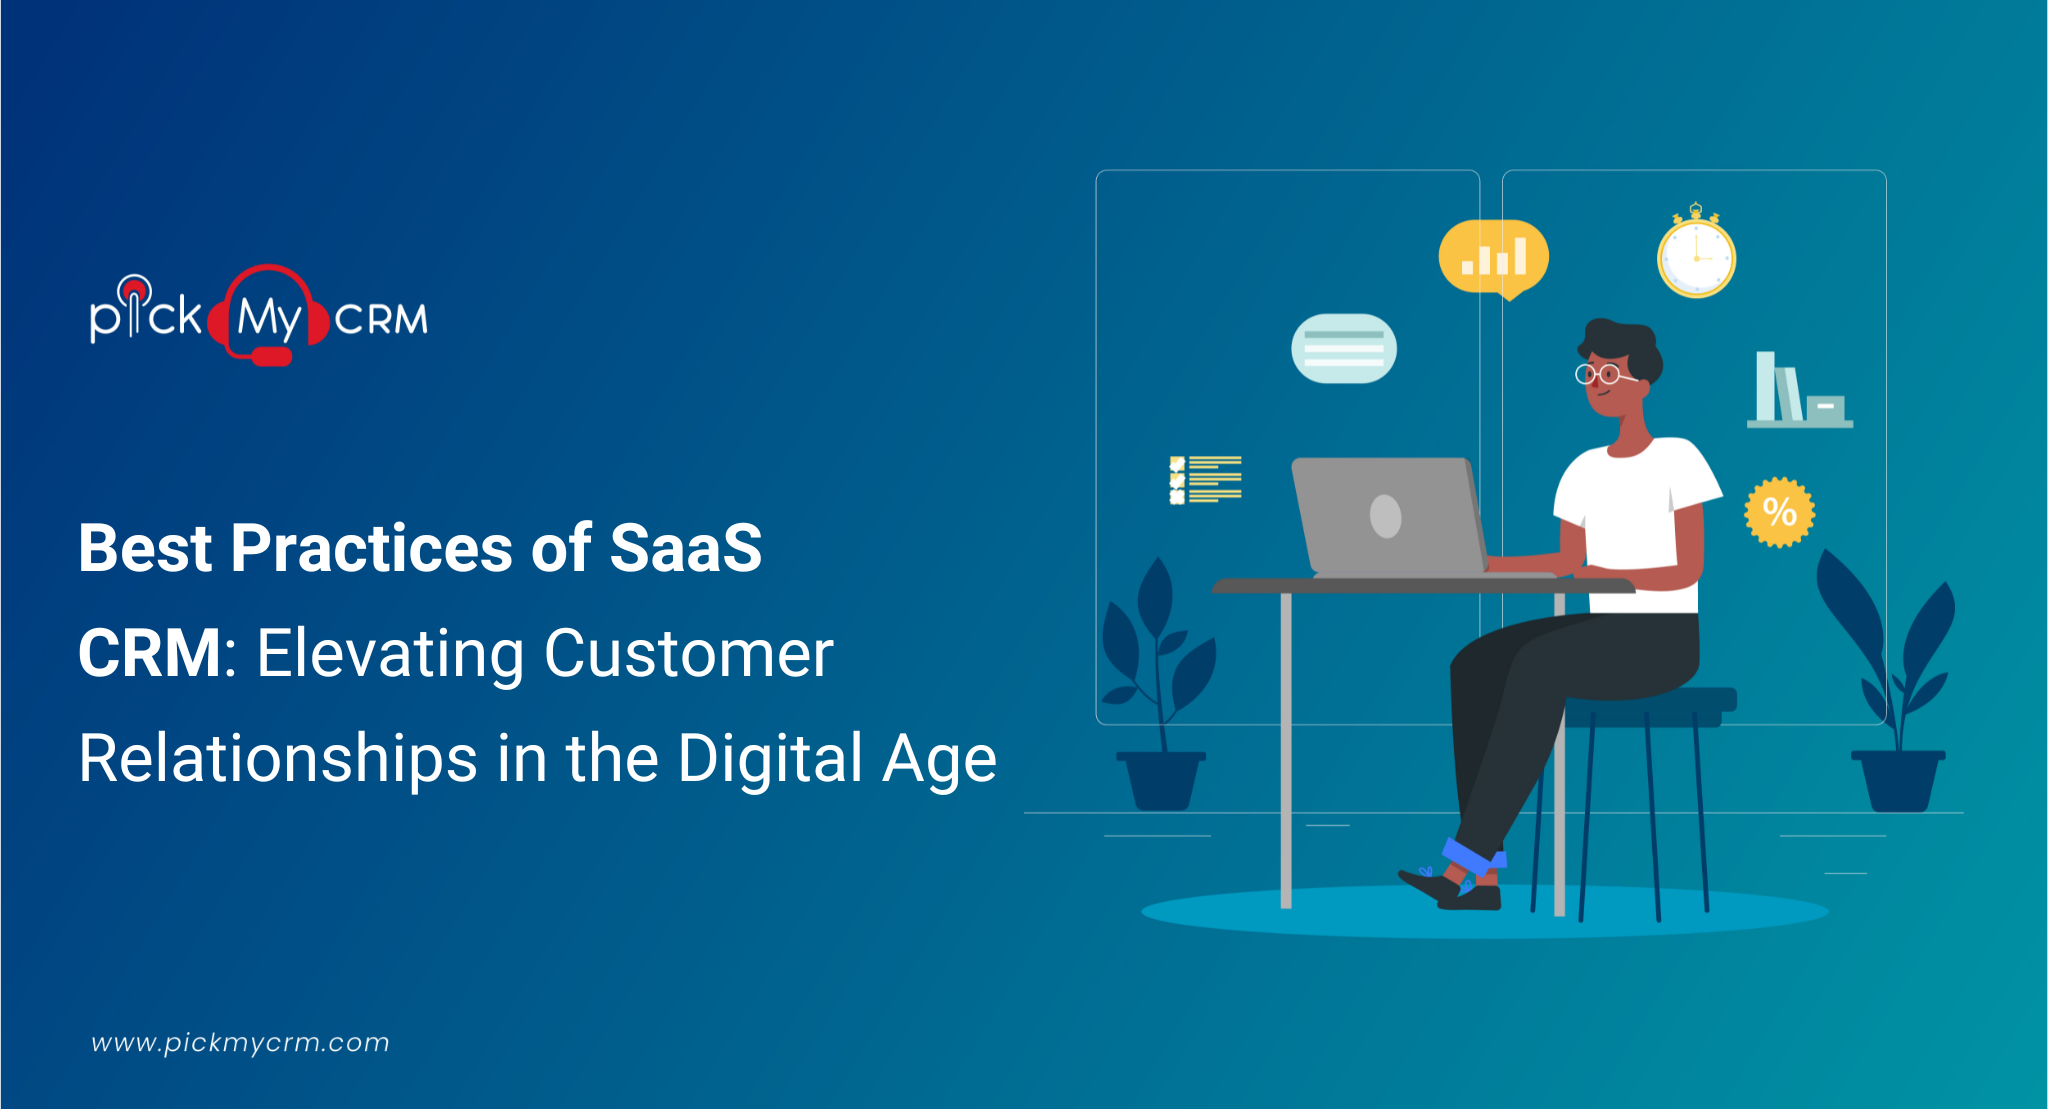 Best Practices of SaaS CRM: Elevating Customer Relationships in the Digital Age